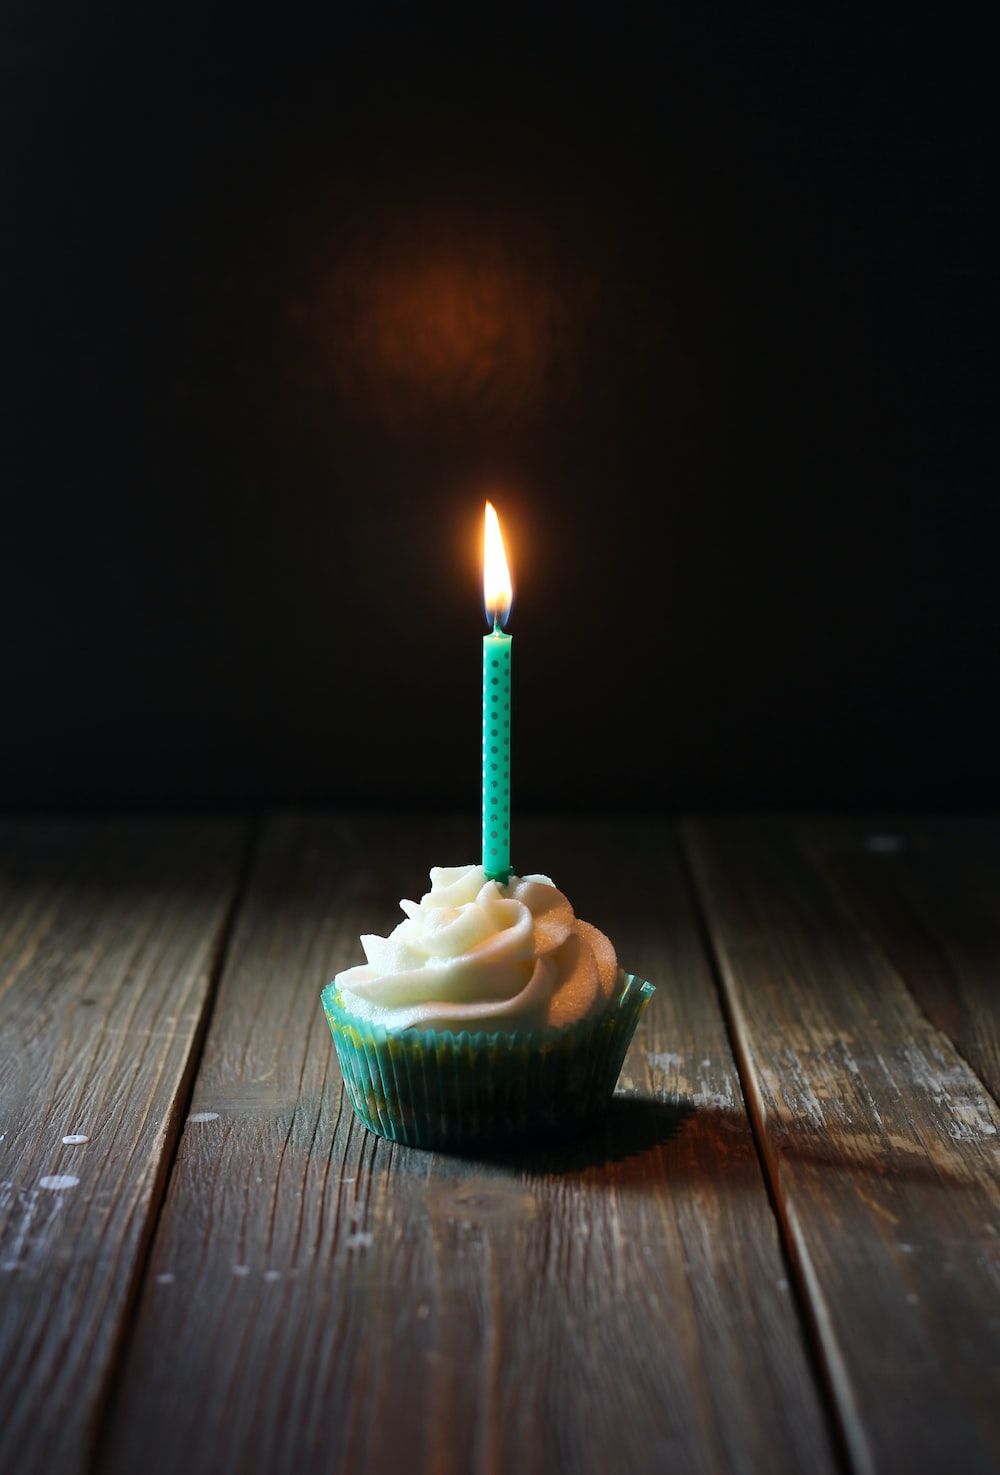 A cupcake with one candle on top - Birthday